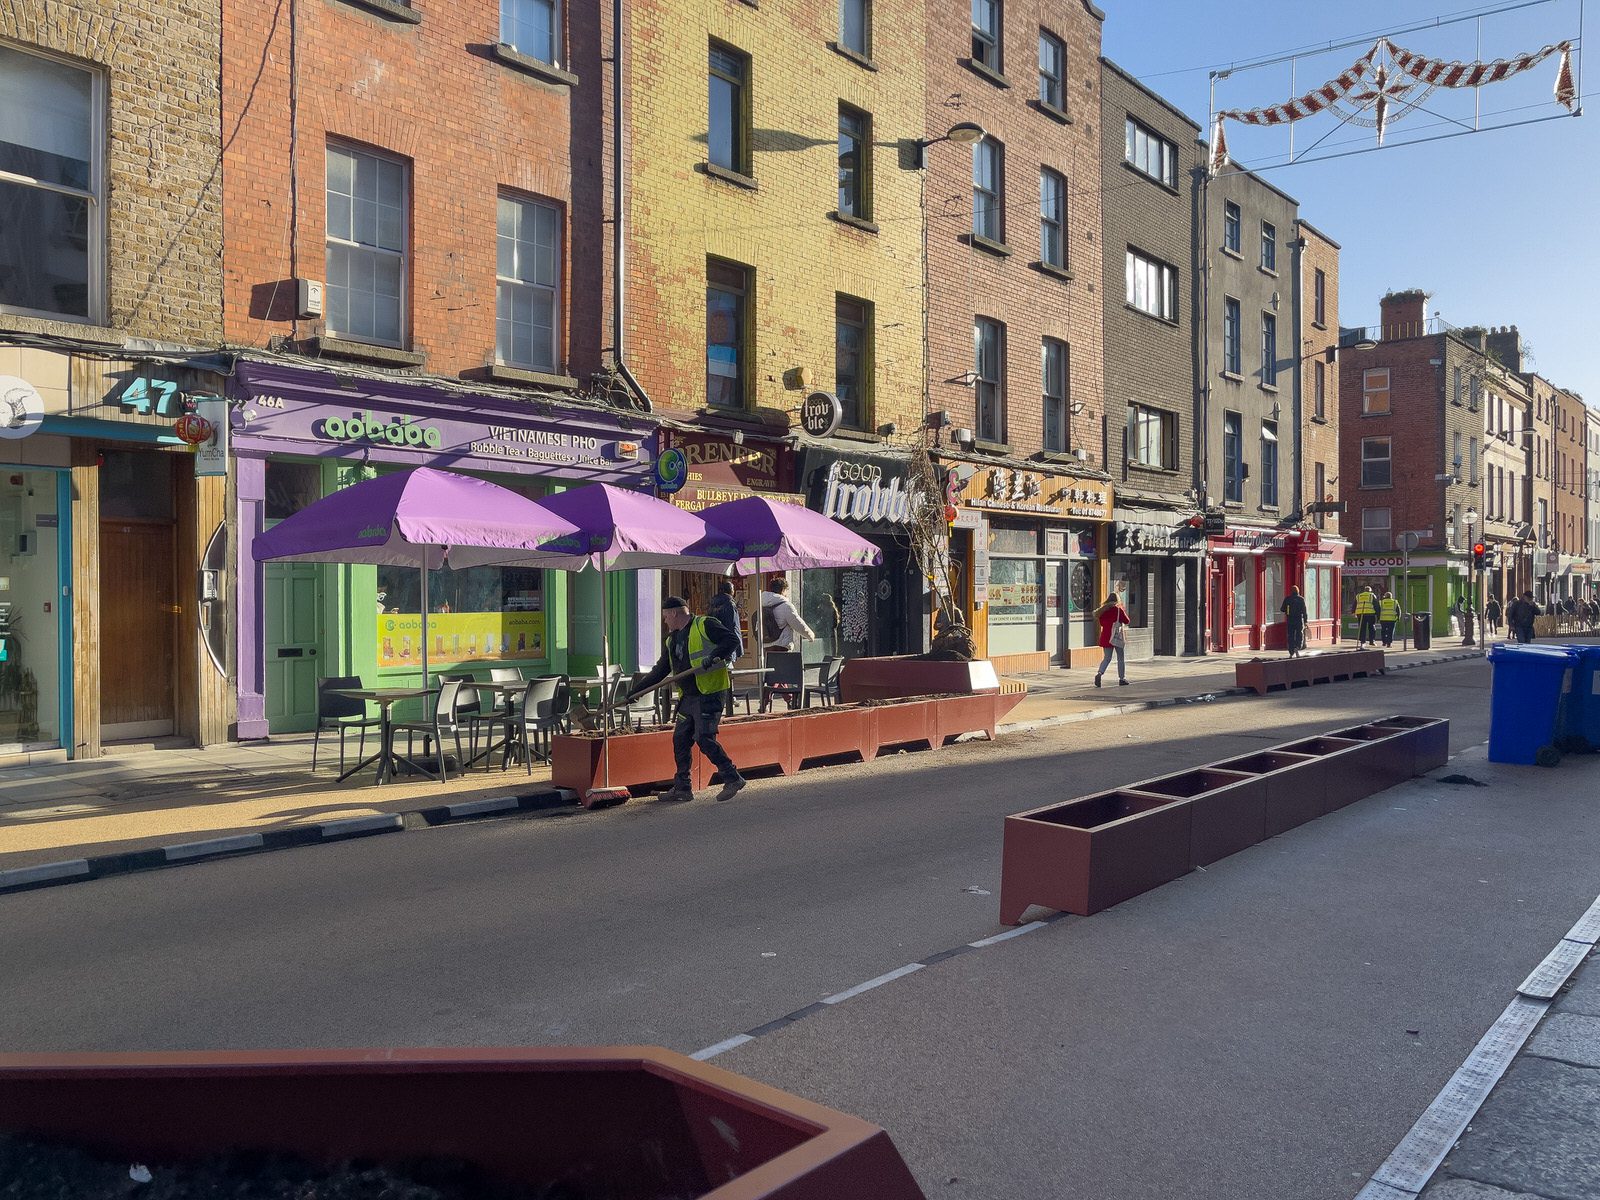 THE NEW STREET FURNITURE AND THE CHRISTMAS TREE [HAVE ARRIVED IN CAPEL STREET]-225860-1